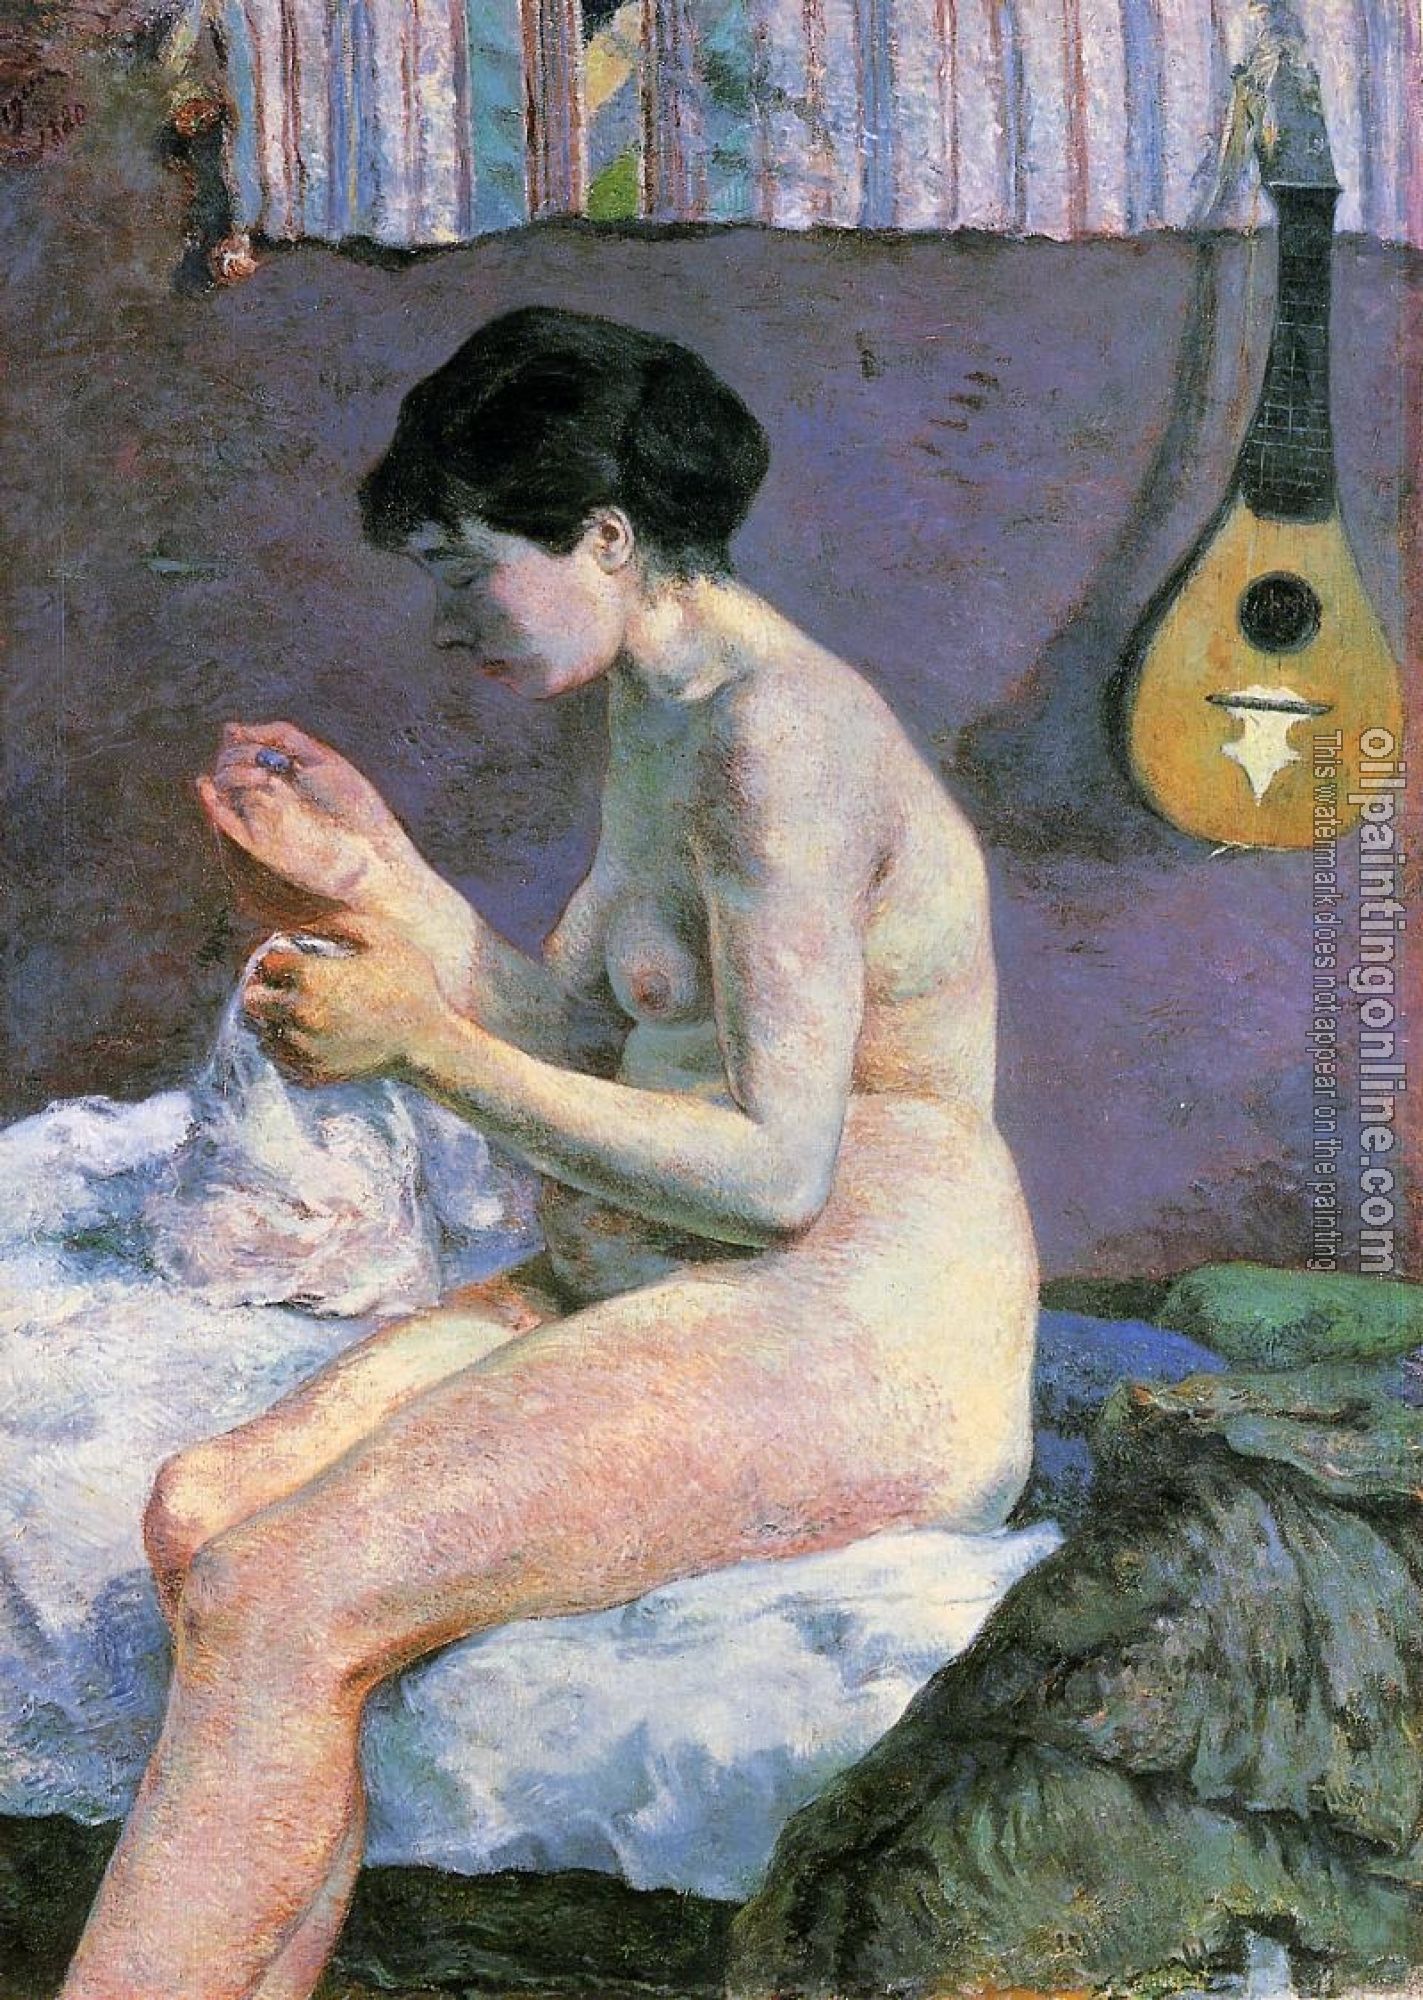 Gauguin, Paul - Study of a Nude, Suzanne Sewing